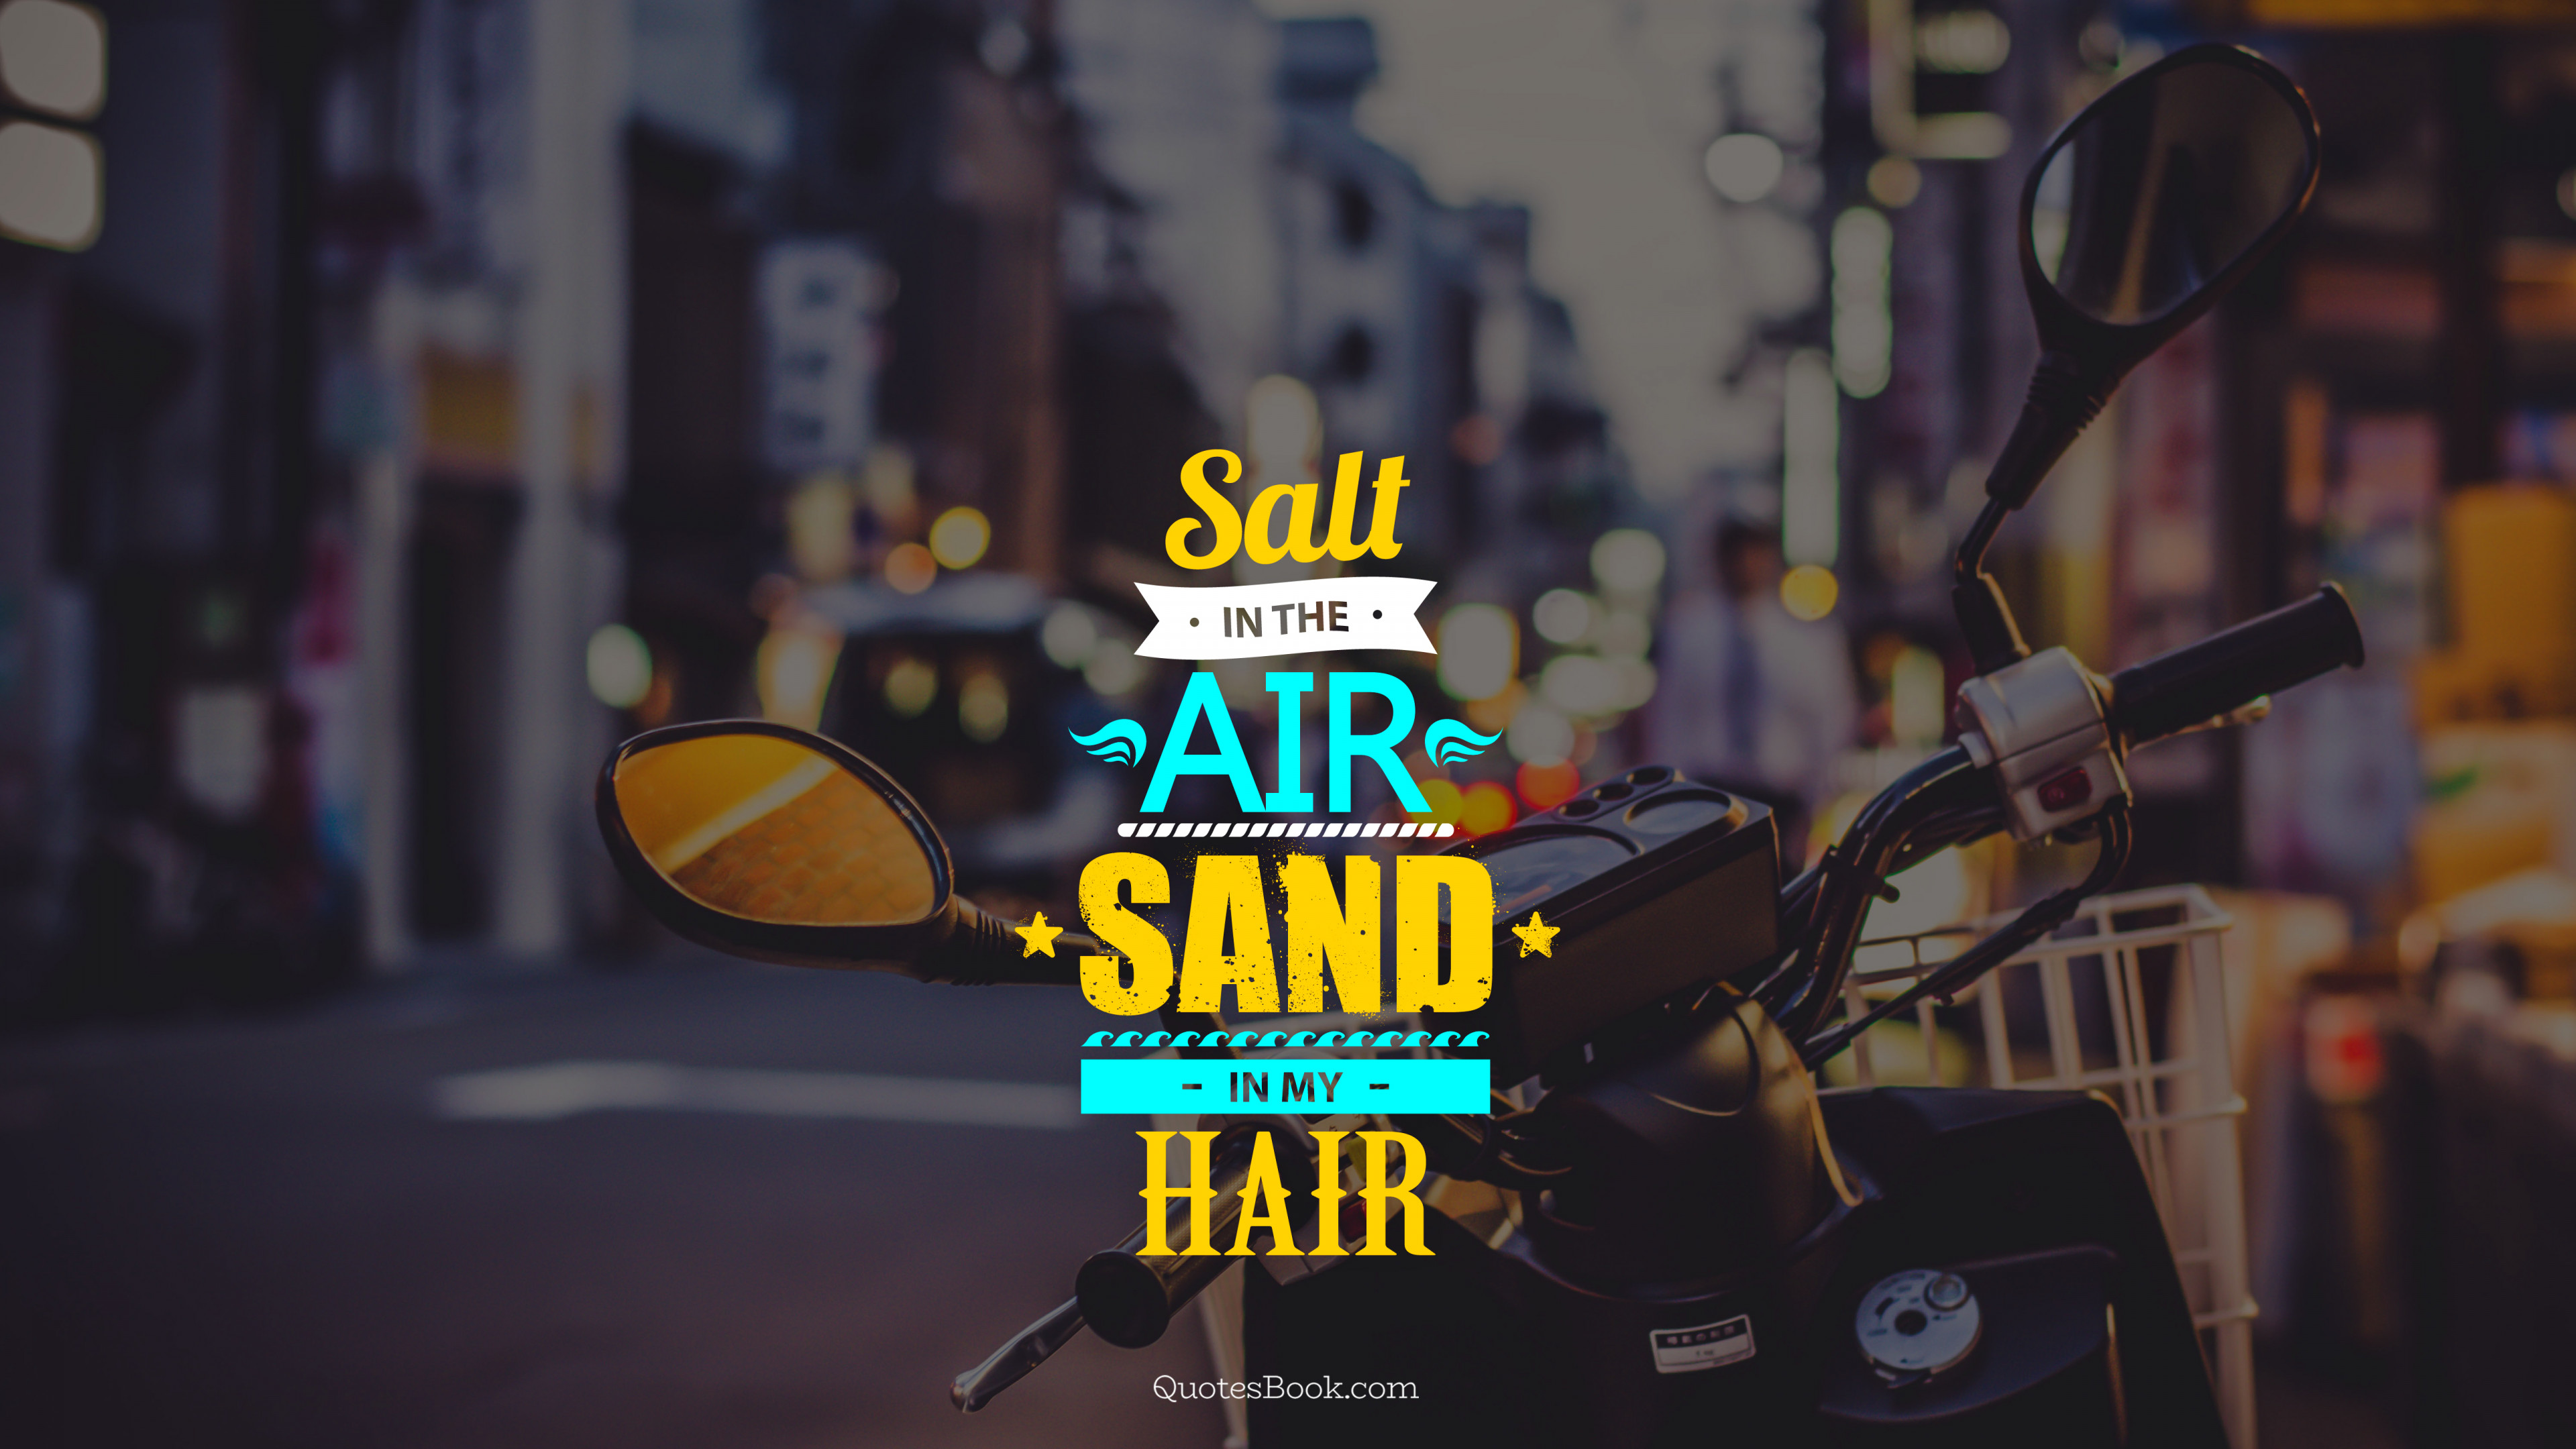 Salt in the air sand in my hair - QuotesBook